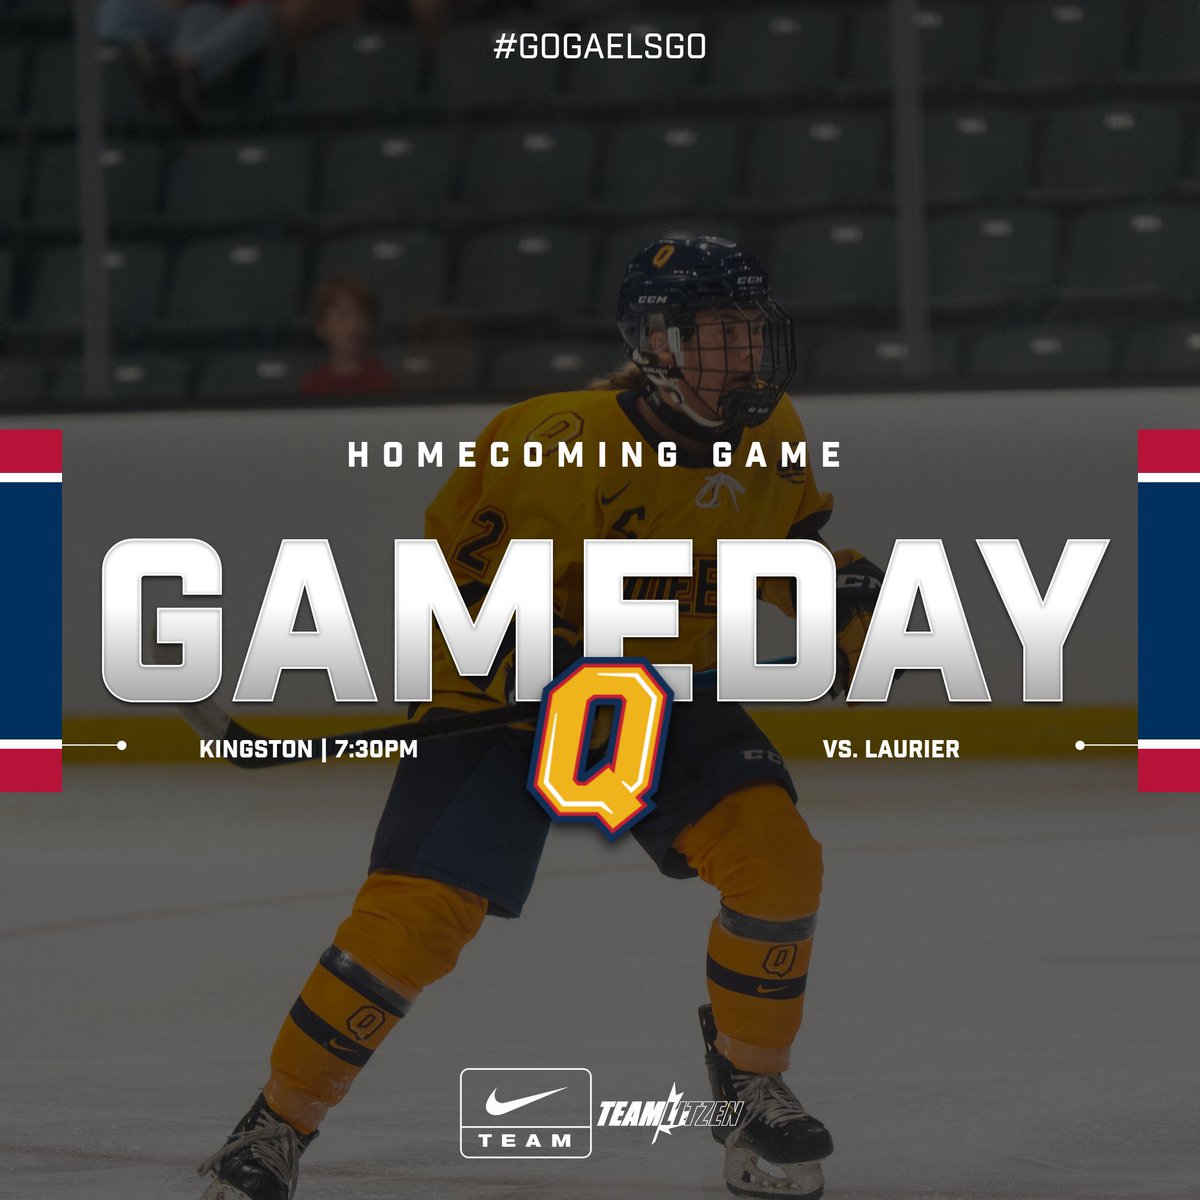 ITS HOMECOMING GAME DAY AT THE MEMORIAL CENTRE 🙌🏻

🏠 Saturday, October 21st @ 7:30pm vs. Laurier 

Use the link in our bio to grab your tickets NOW! … and don’t forget that student tickets are FREE 🎟️

#GoGaelsGo | #LeadTheWay | #QueensUniversity | #ChaGheill | #WomensHockey